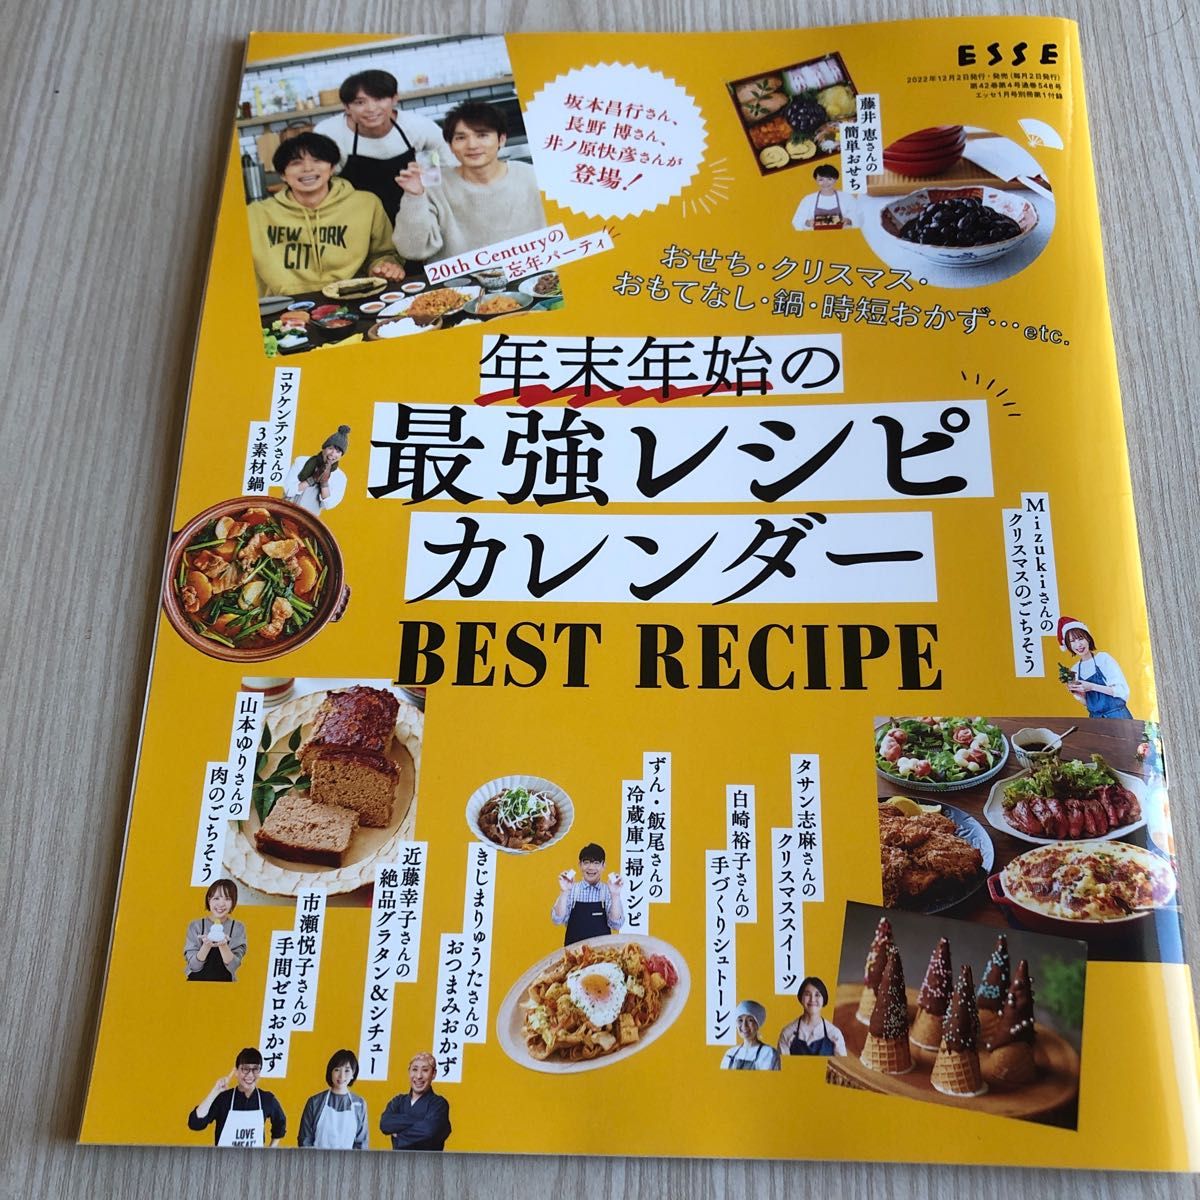 WEB限定 雑誌付録 料理レシピ 5冊セット 和食 べんとう